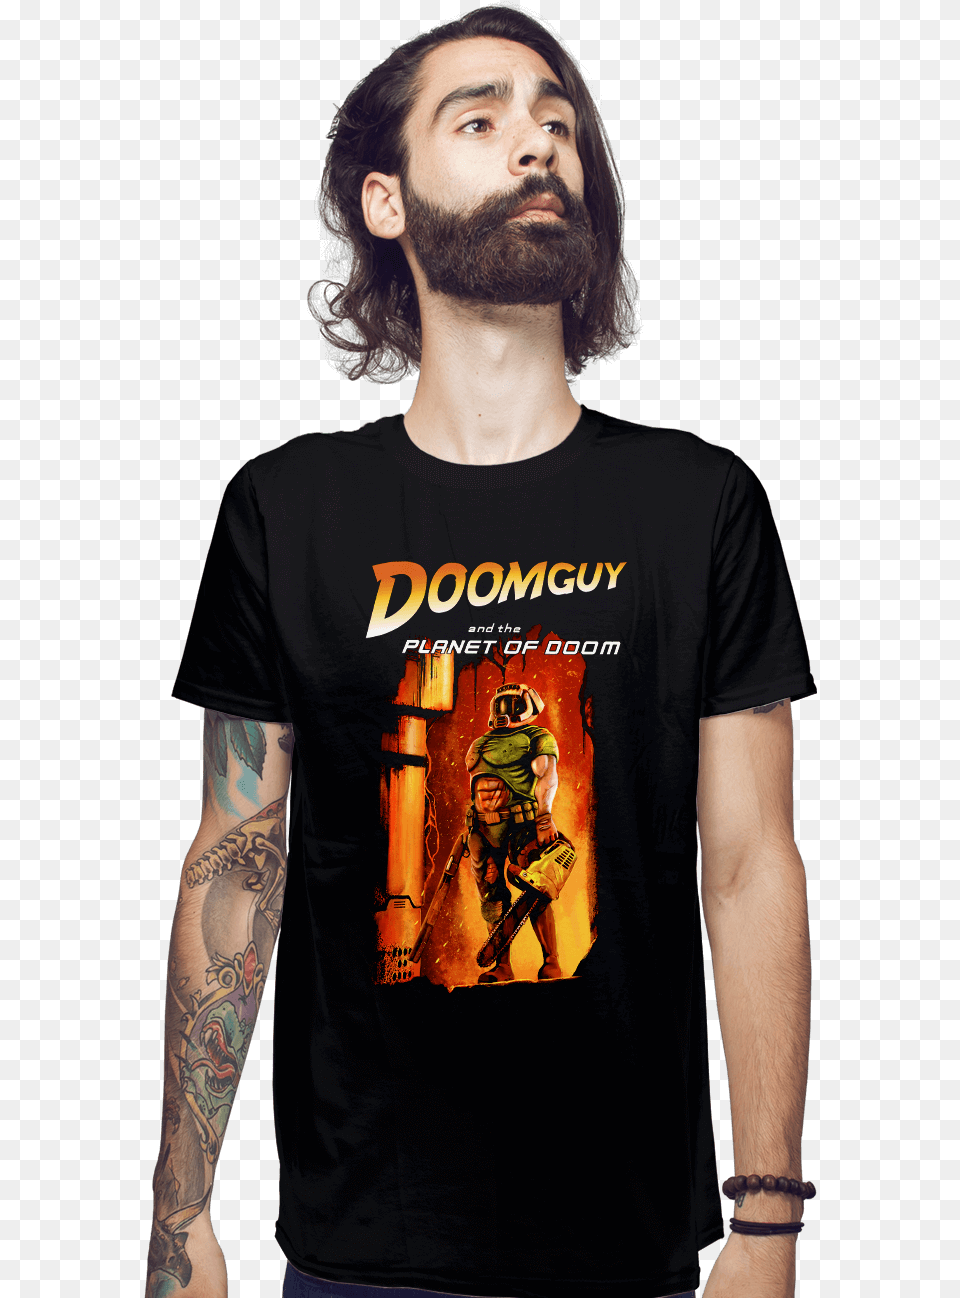 Doomguy Amp The Planet Of Doom Gift, Tattoo, T-shirt, Clothing, Skin Free Png Download